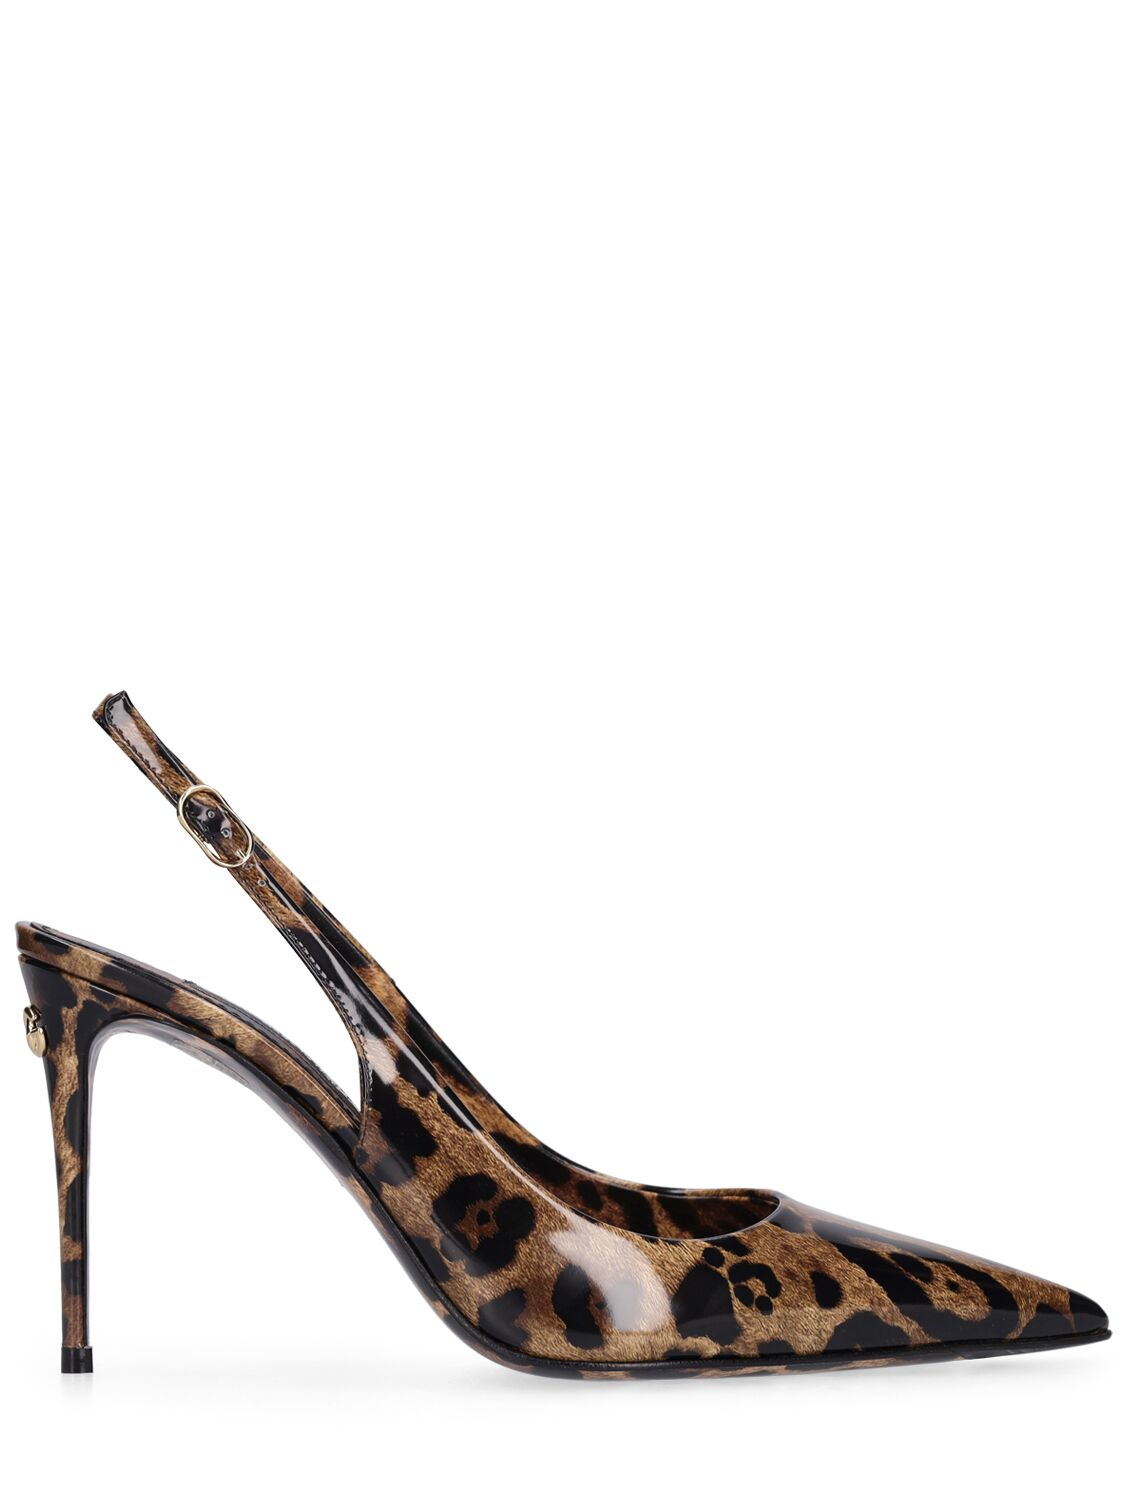 Dolce & Gabbana 90mm Lollo Printed Leather Pumps In Leopard